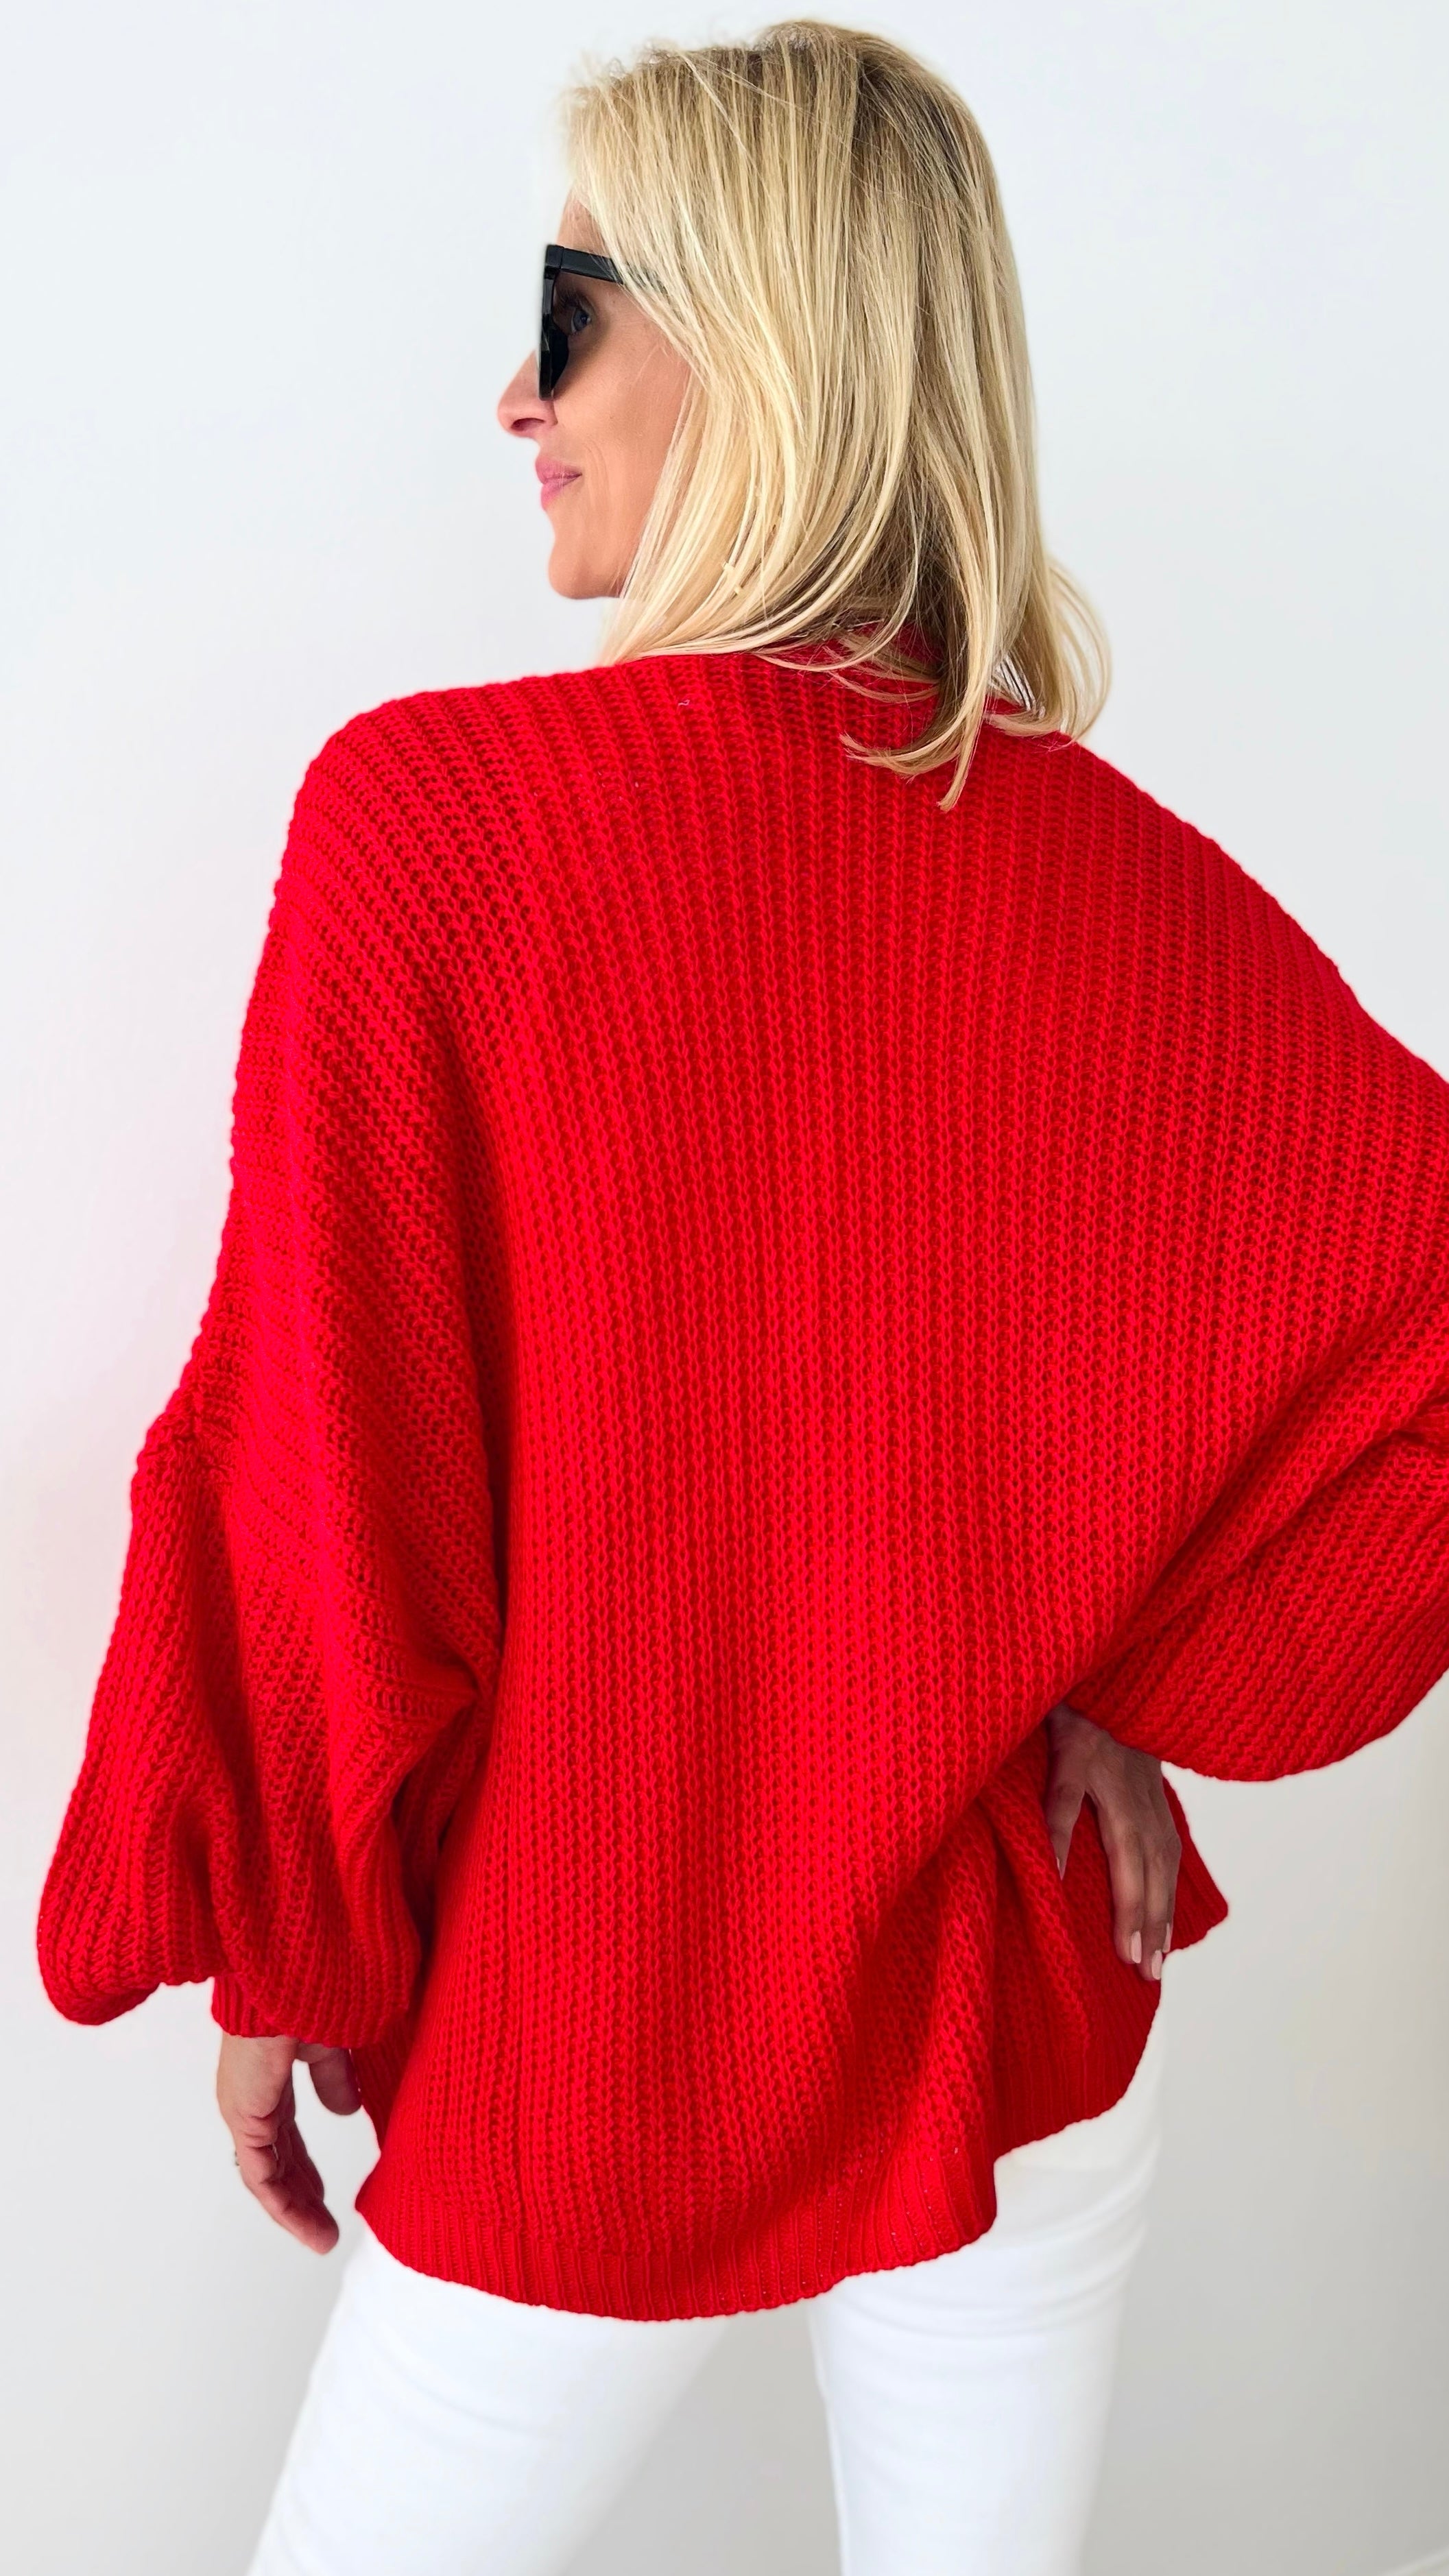 Sugar High Italian Cardigan- Red-150 Cardigans/Layers-Yolly-Coastal Bloom Boutique, find the trendiest versions of the popular styles and looks Located in Indialantic, FL